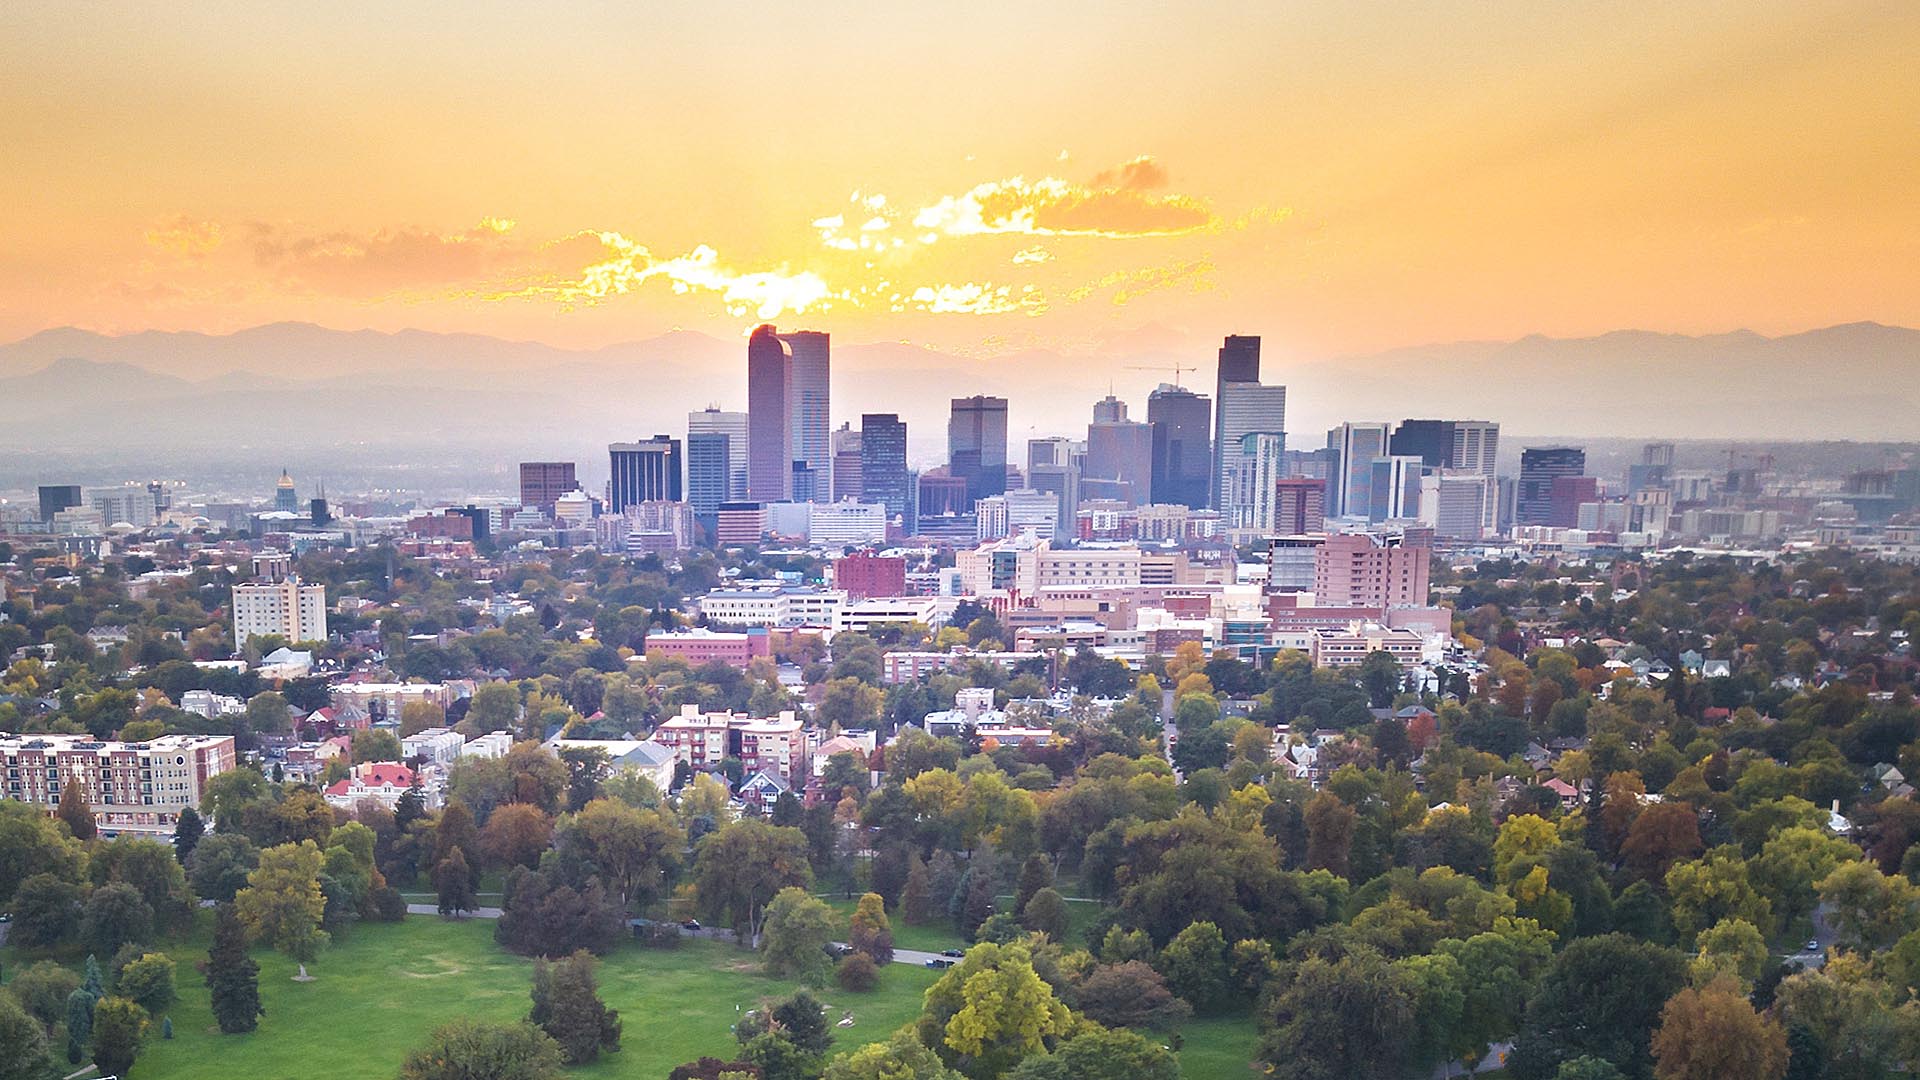 View of Denver skyline at sunset with haze